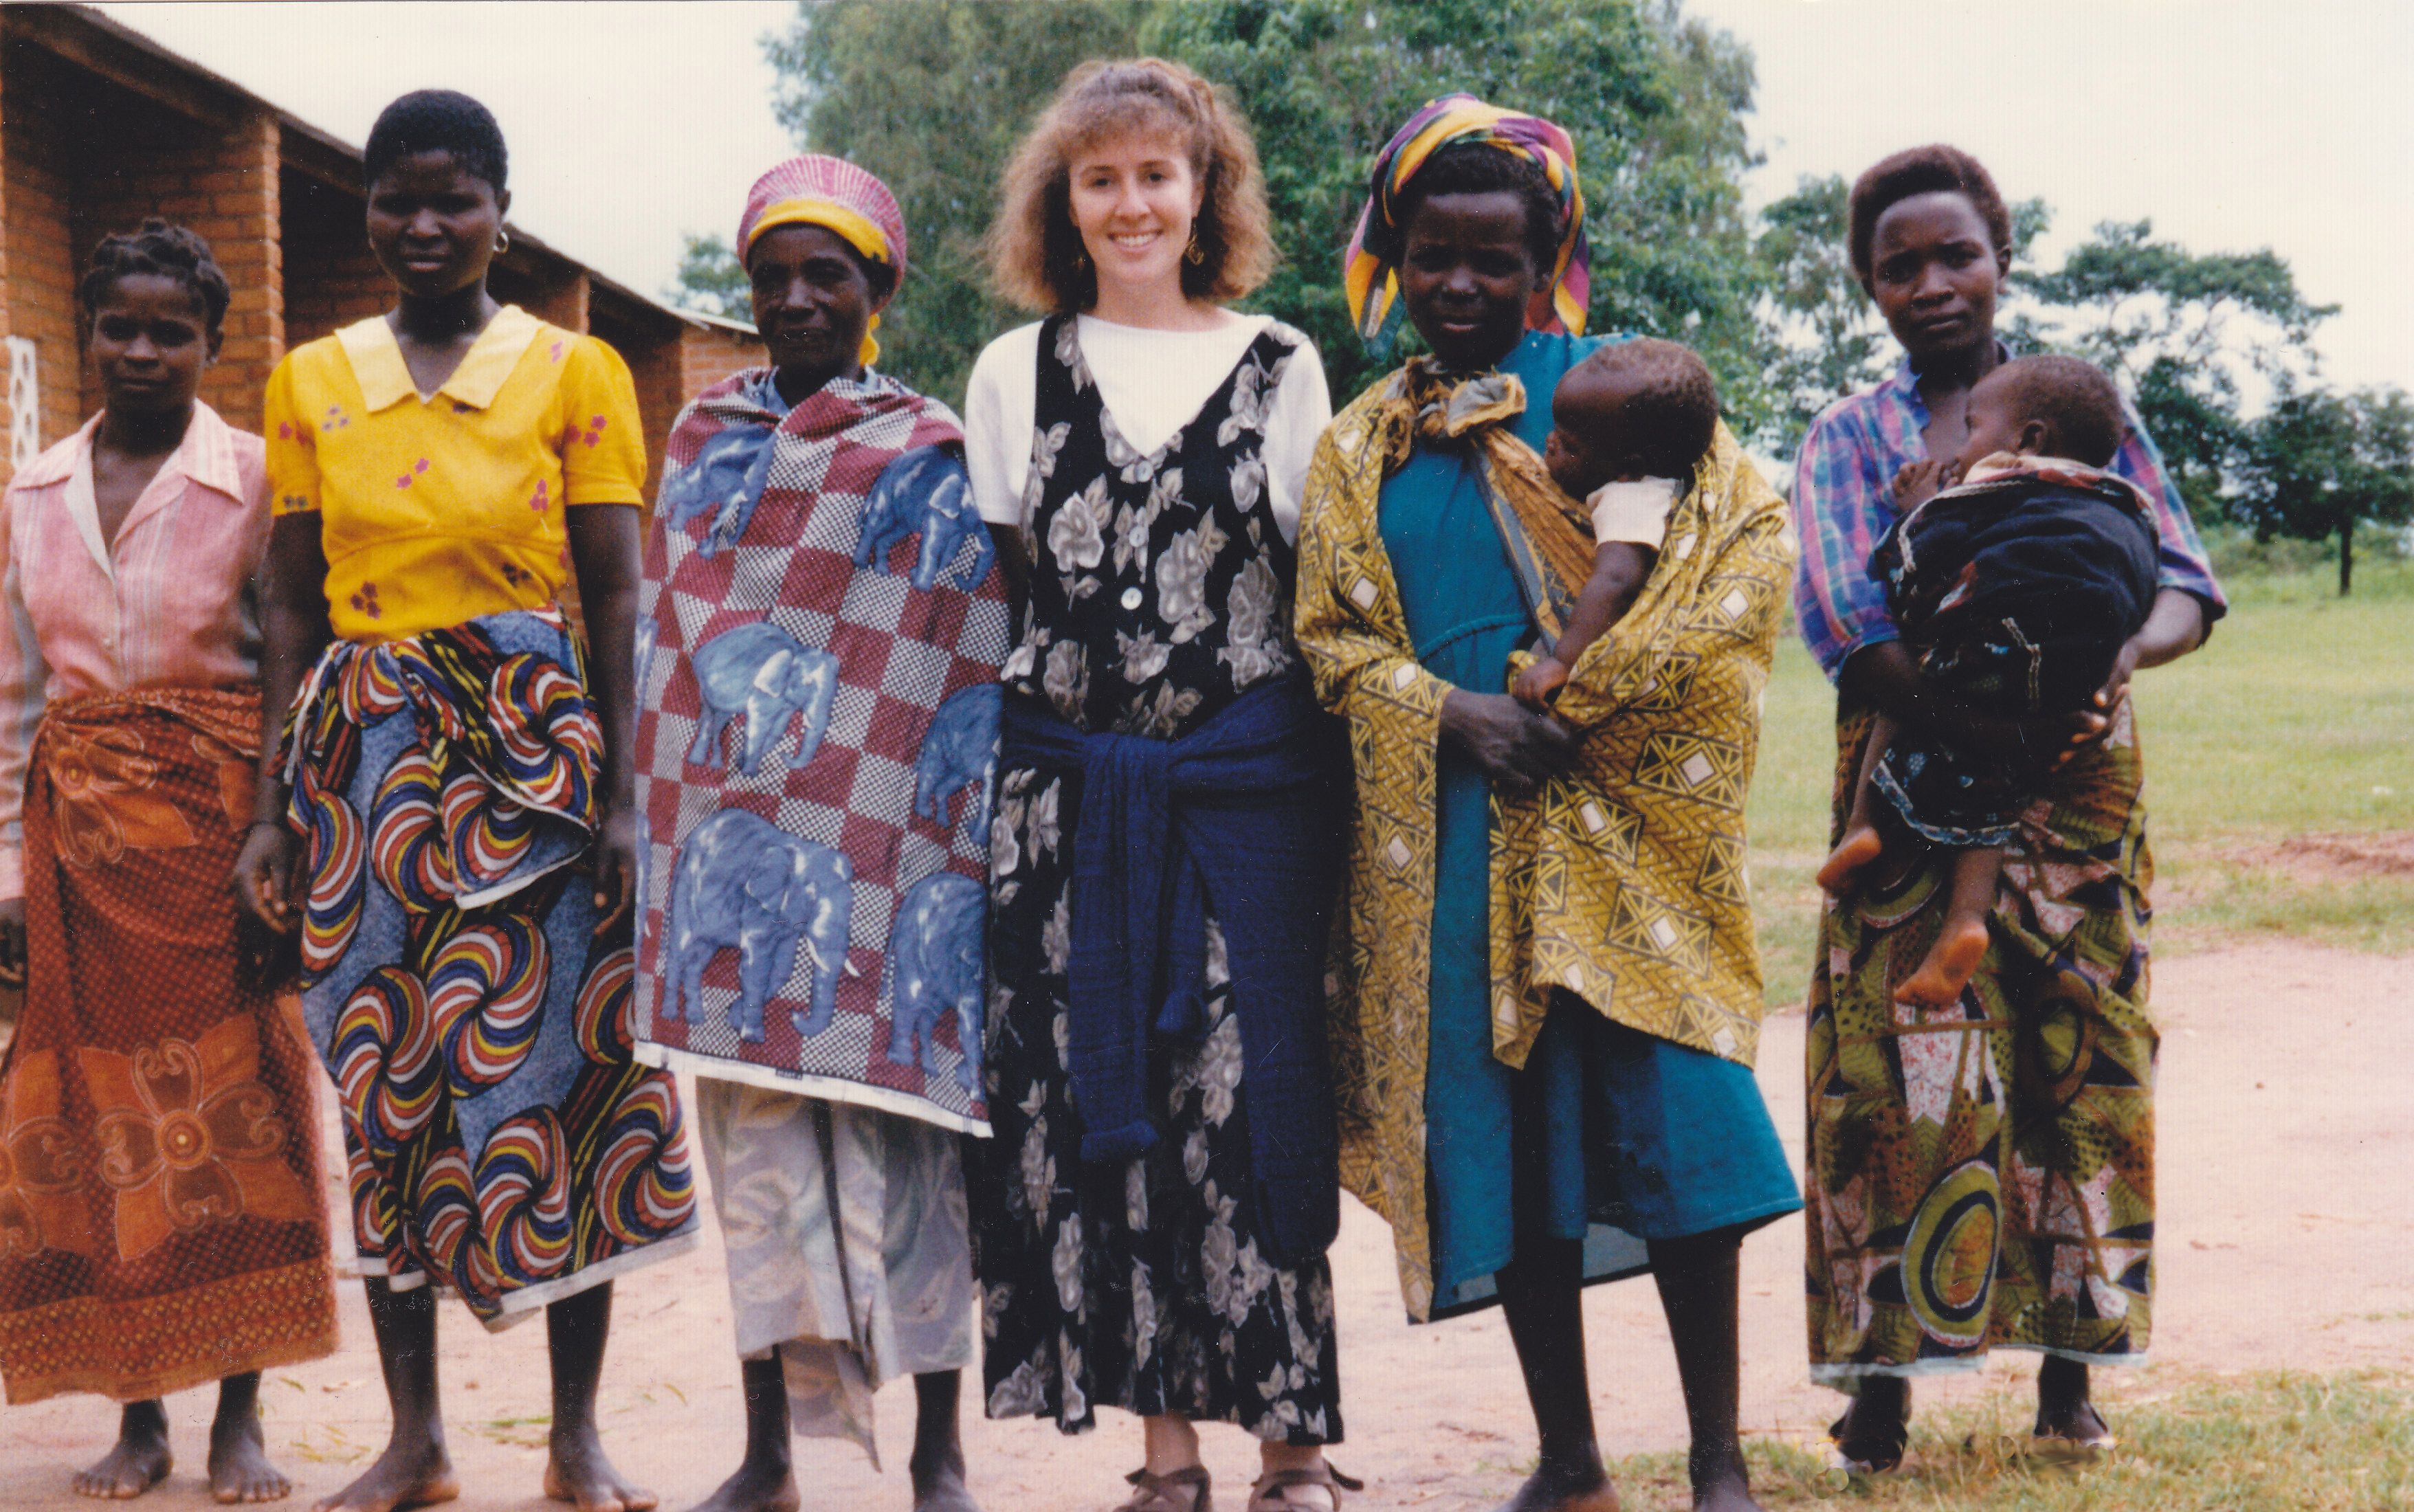 Author Shana Burg with villagers in Malawi photo